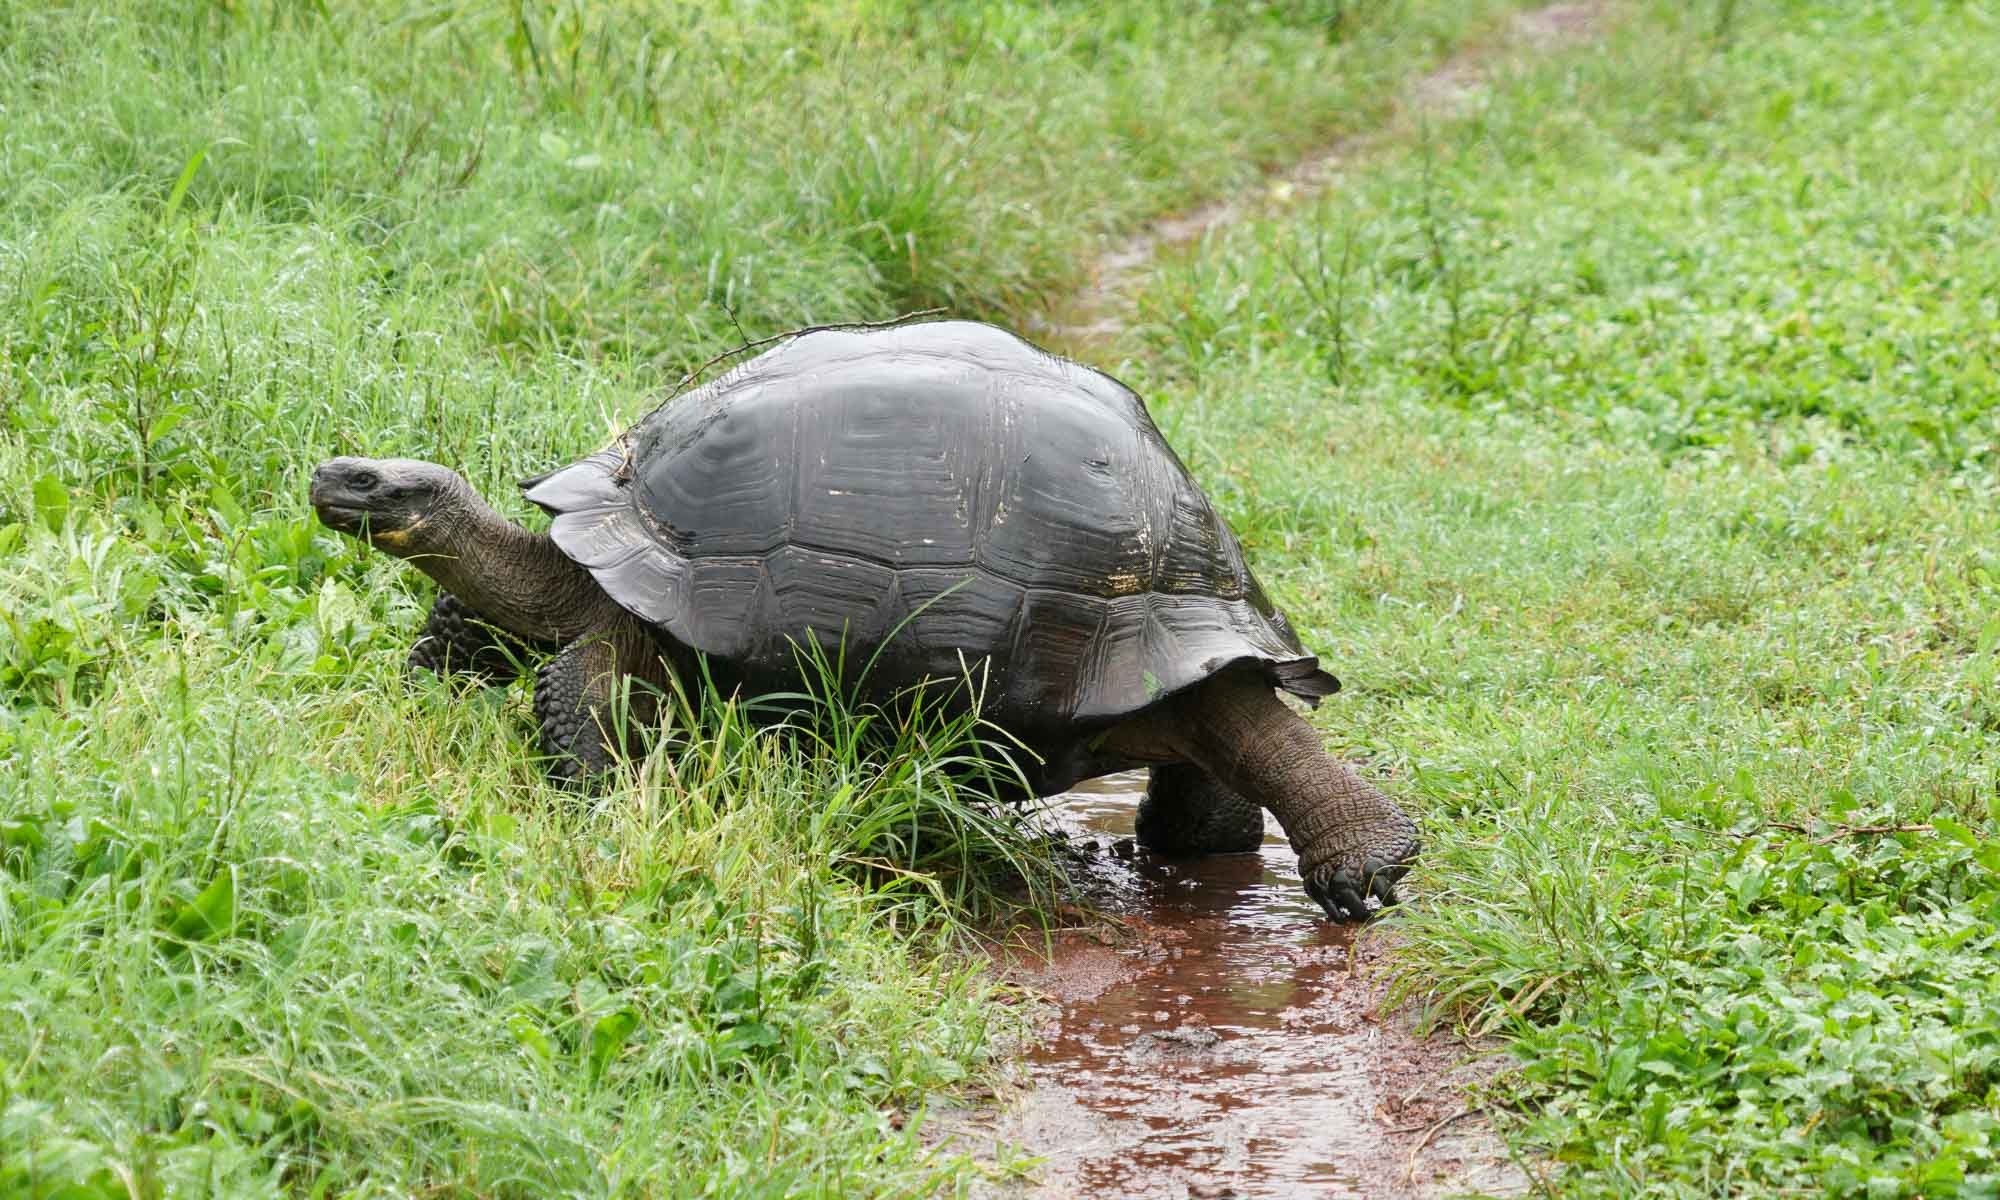 A giant tortoise crossing our path